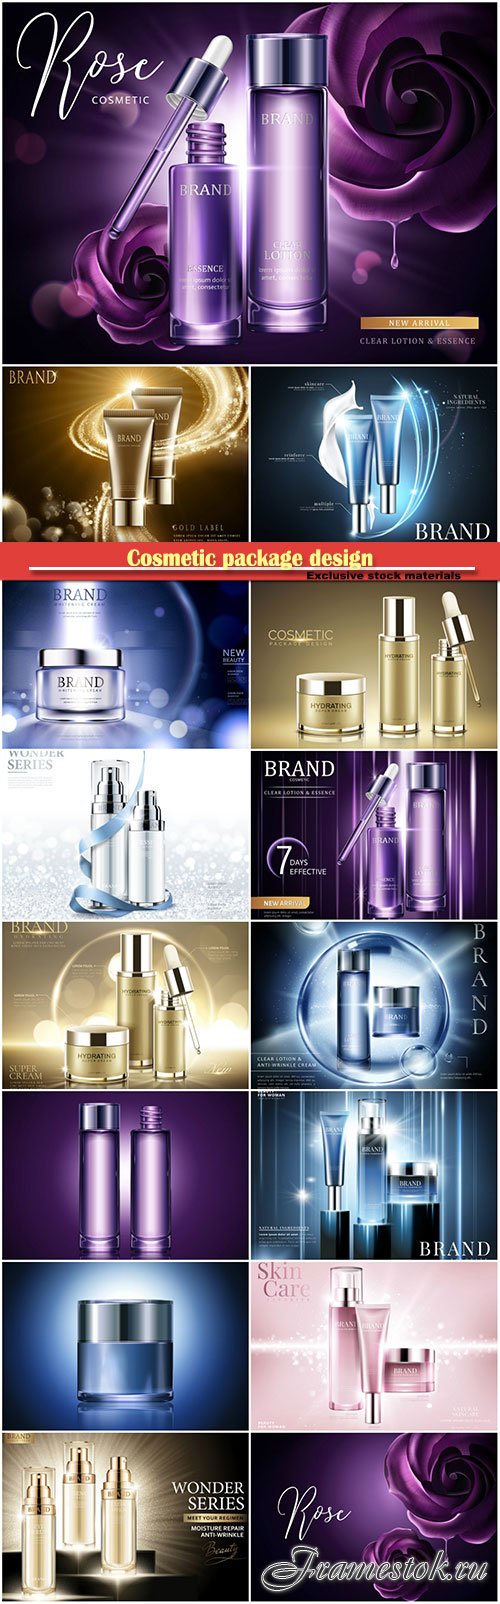 Cosmetic package design in 3d vector illustration